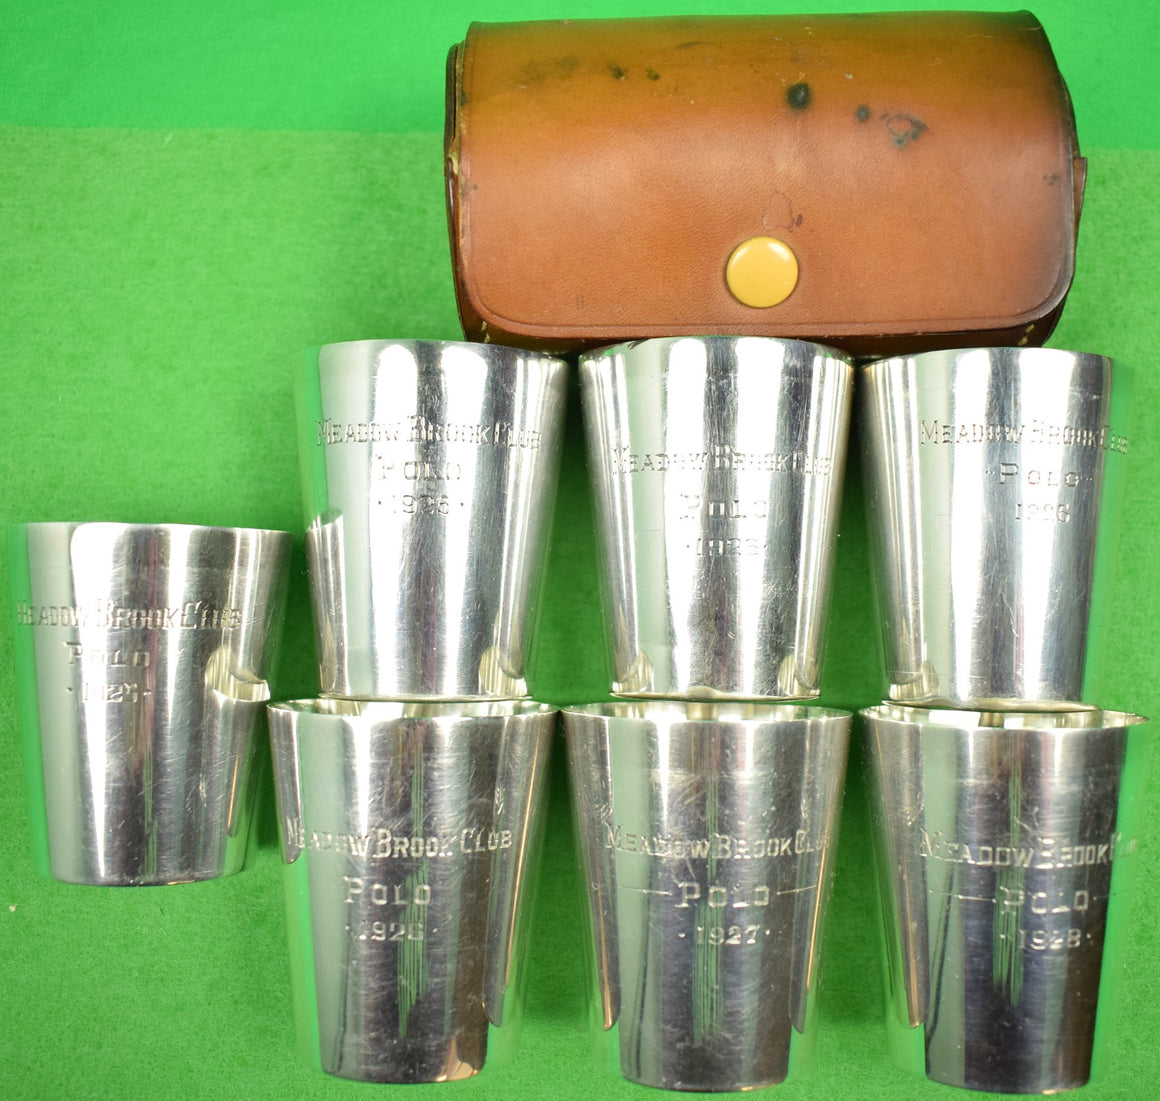 "Set x 7 Meadow Brook Club Gorham Sterling Silver c1920s Polo Jigger Cups" (SOLD)